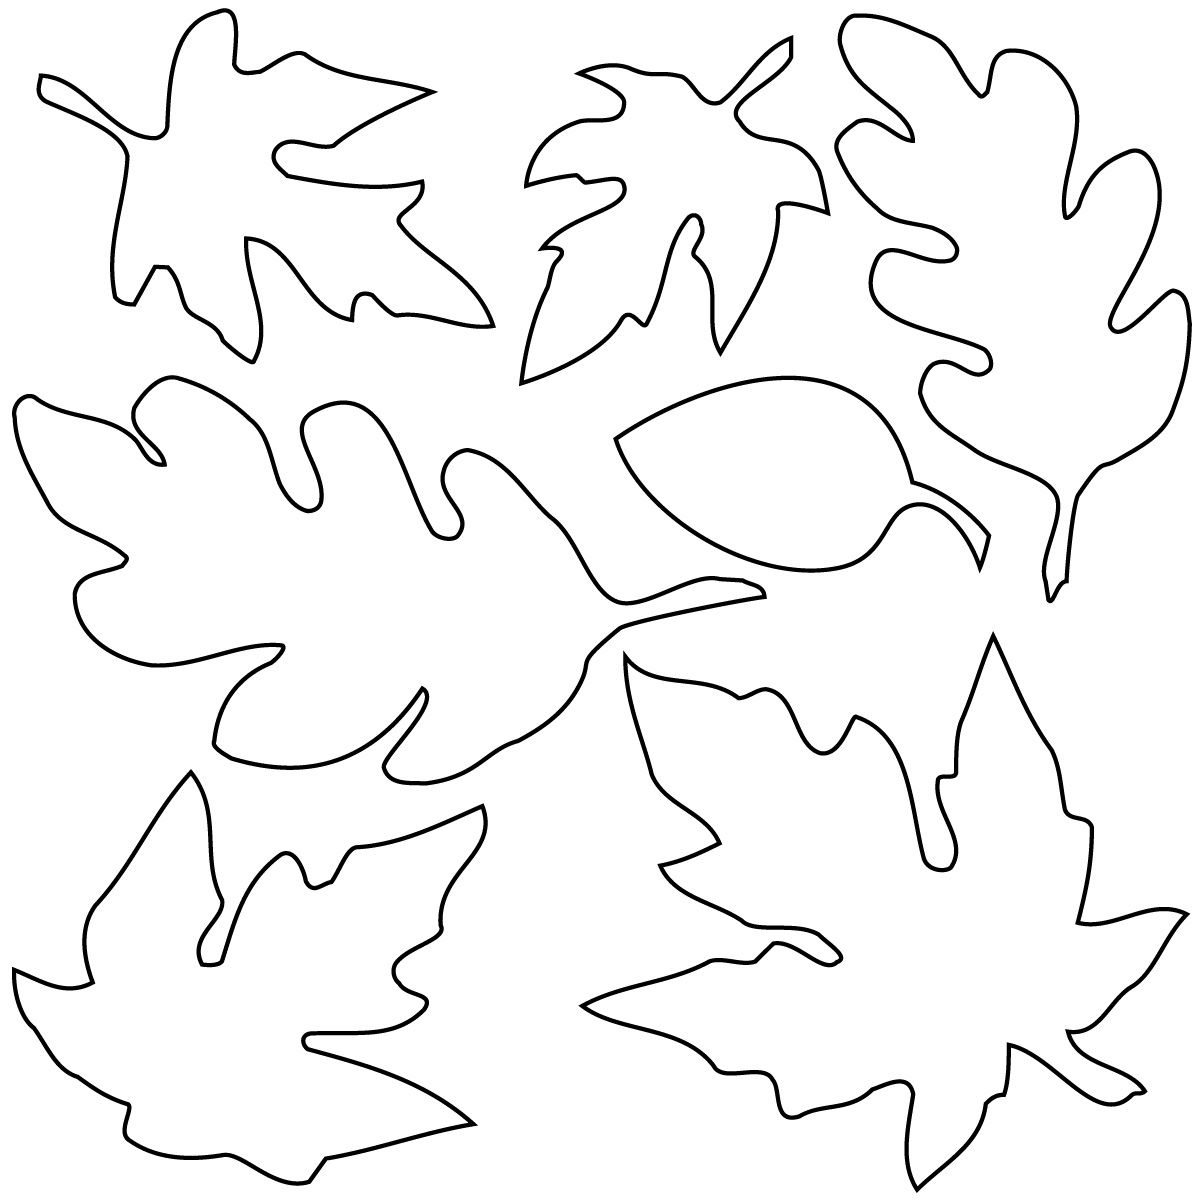 Related Leaf Coloring Pages Item-13080, Leaf Coloring Pages Fall - Free Printable Fall Leaves Coloring Pages